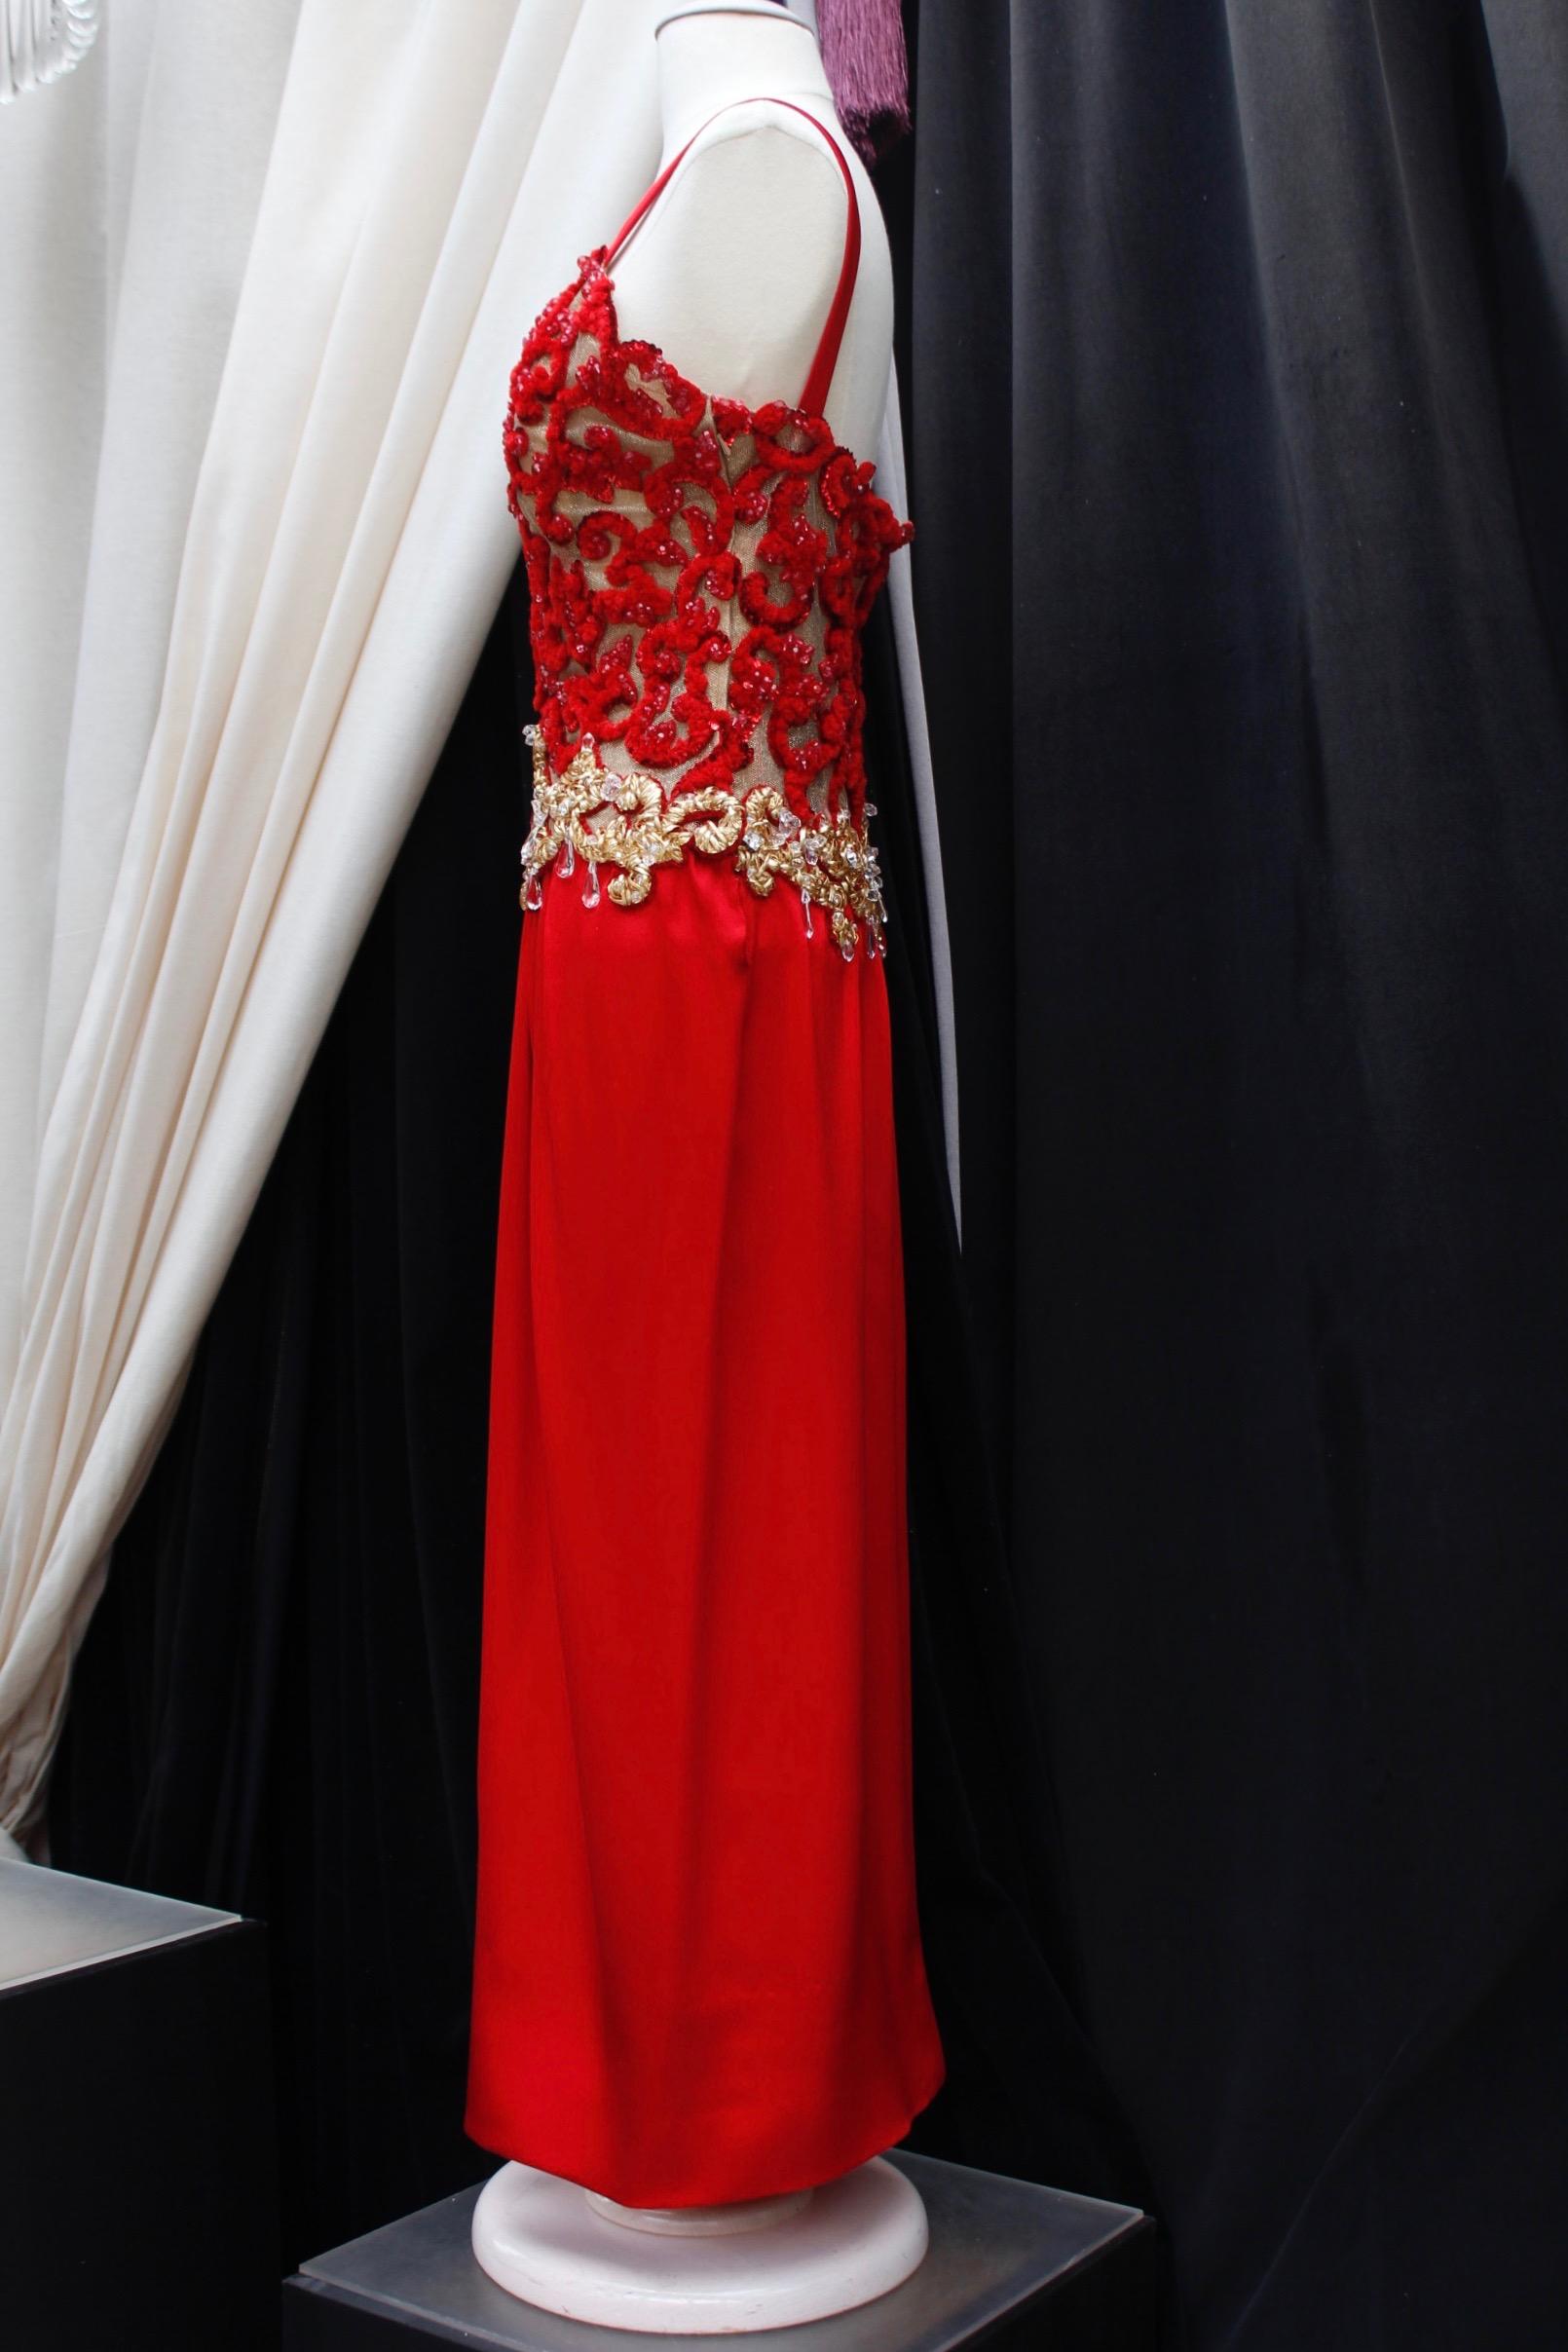 Women's Givenchy Haute Couture gorgeous red and gold evening dress